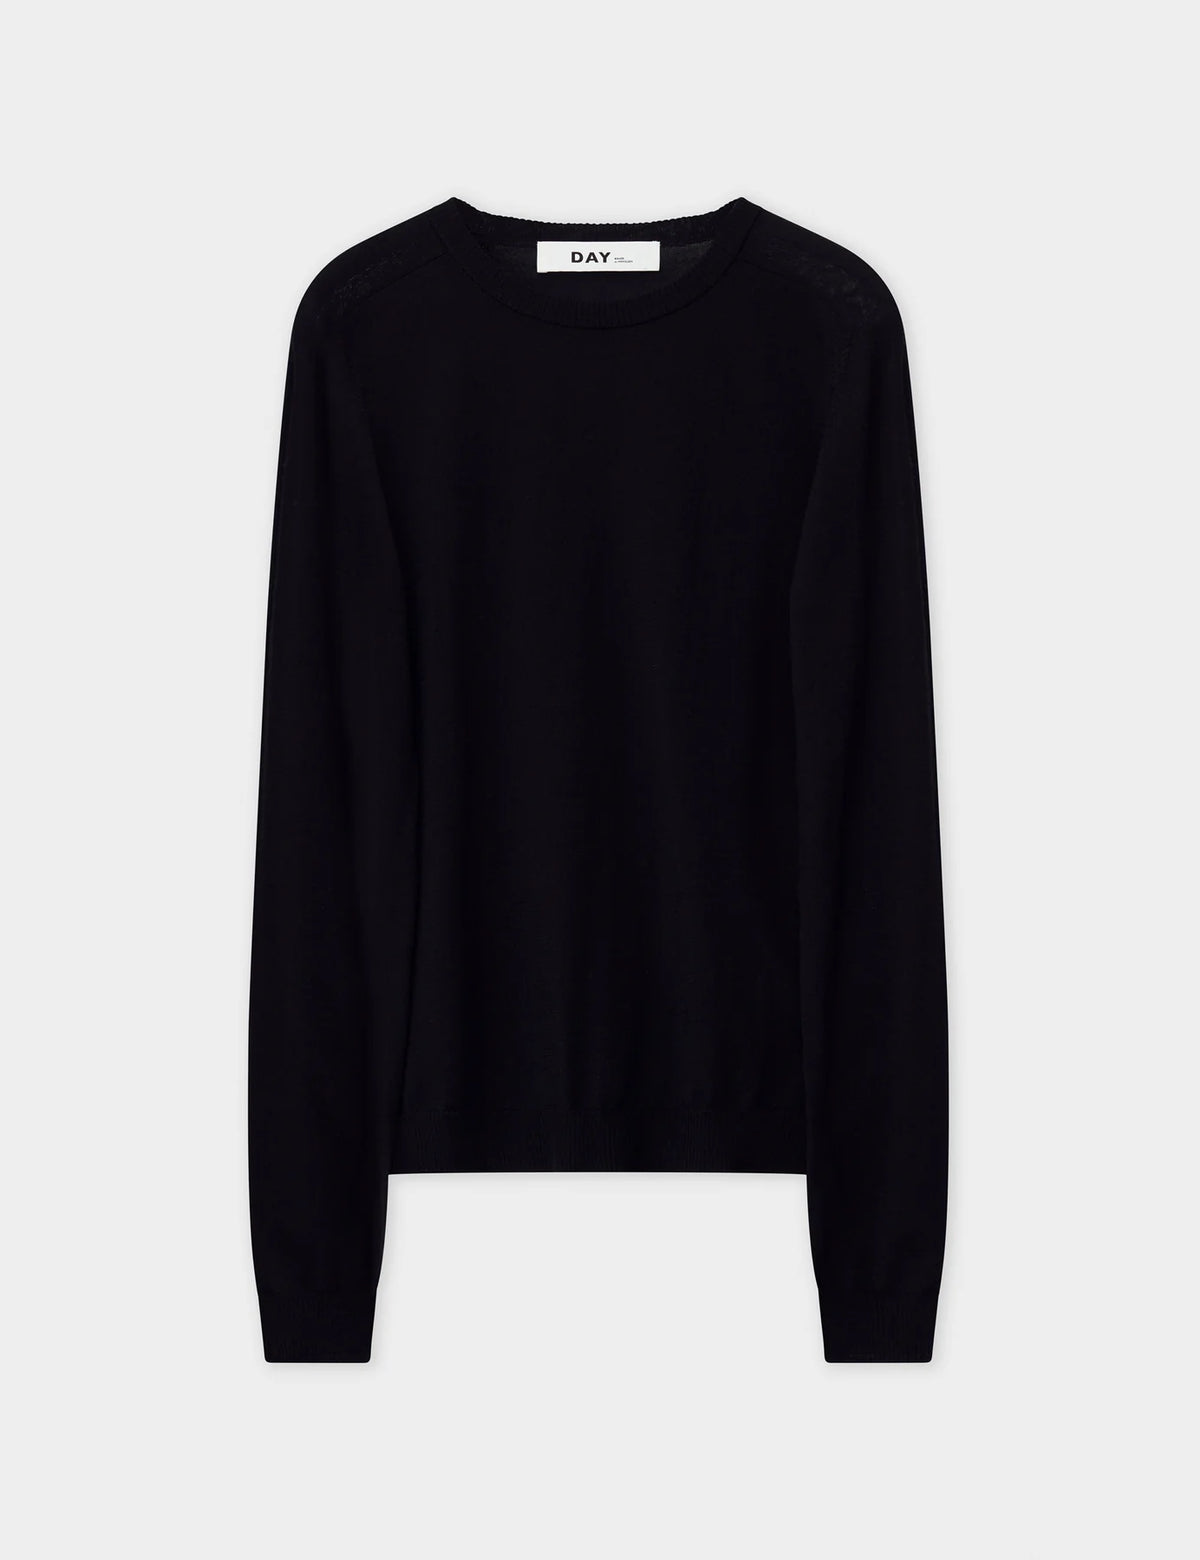 Fine knit black crew neck jumper with long sleeves